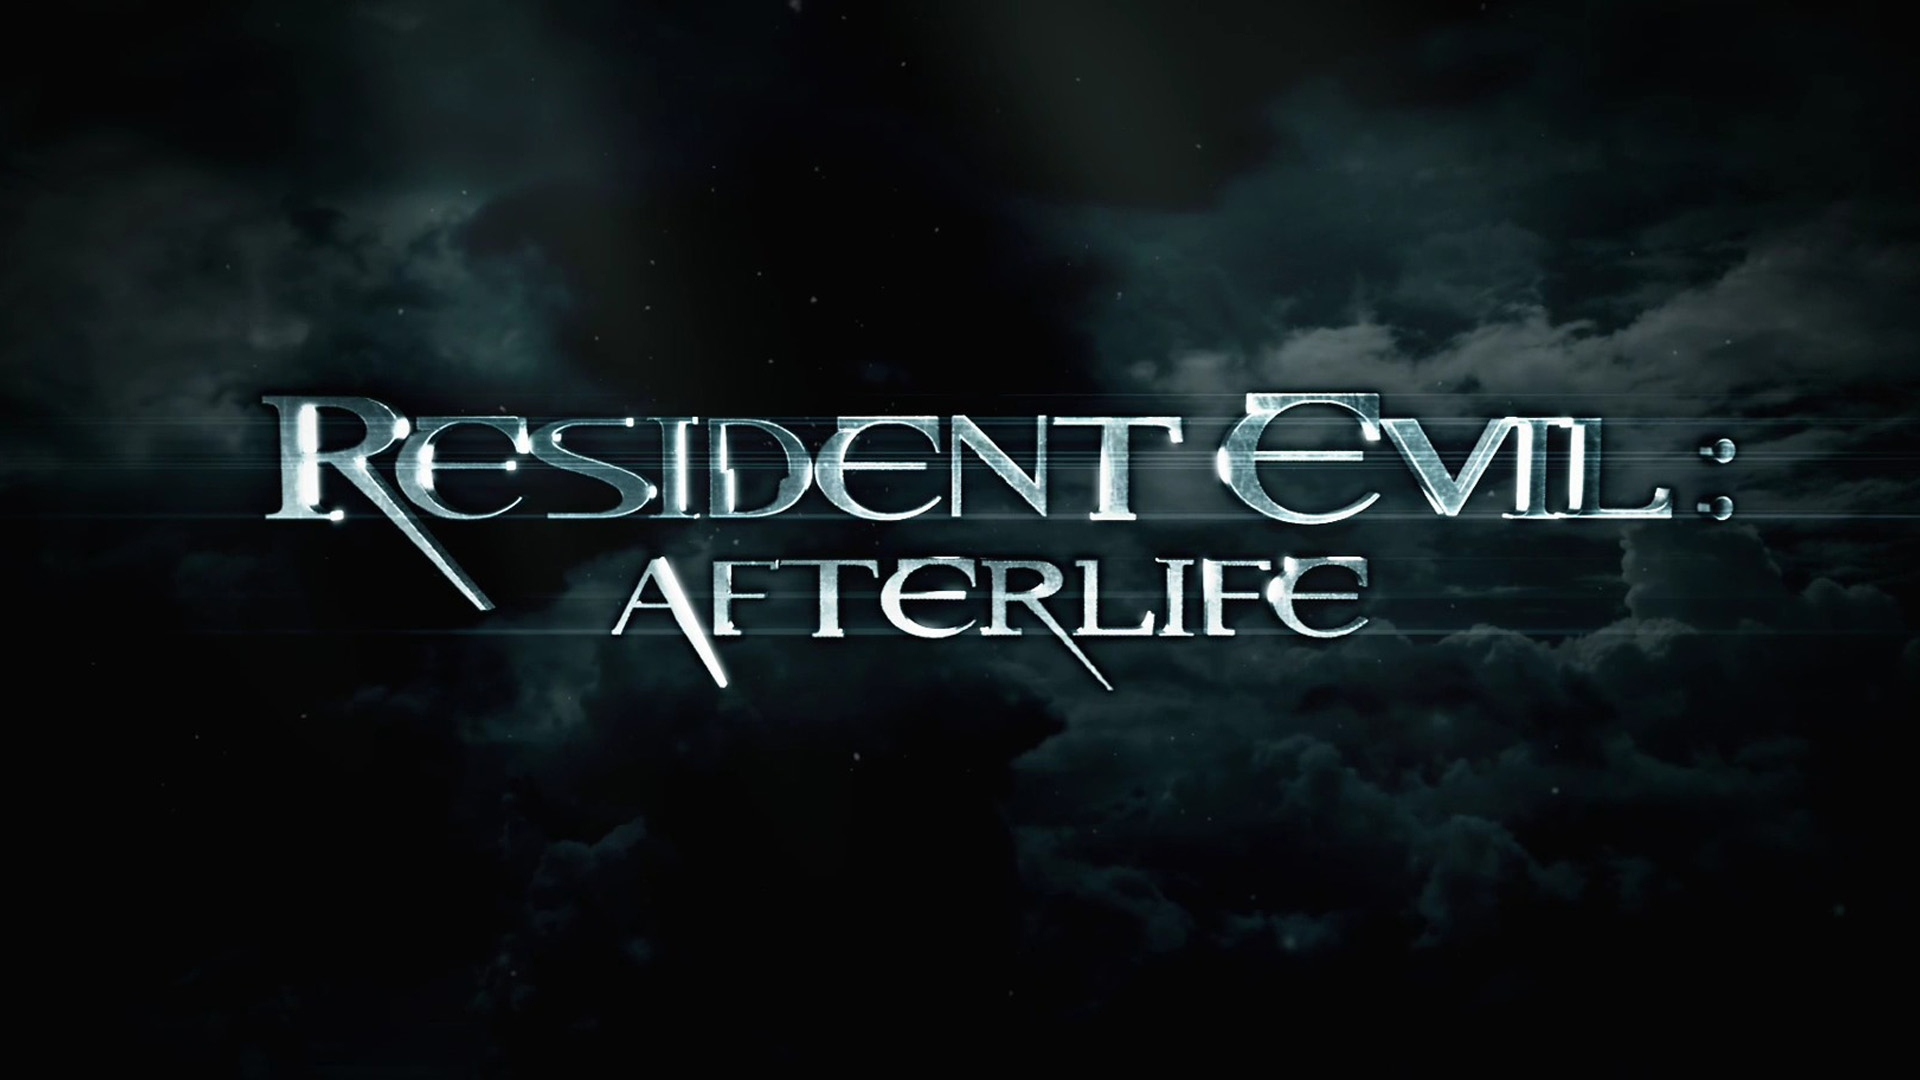 1920x1080 Wallpaper : Resident Evil, afterlife, movie, photo, game 647987 HD Wallpapers